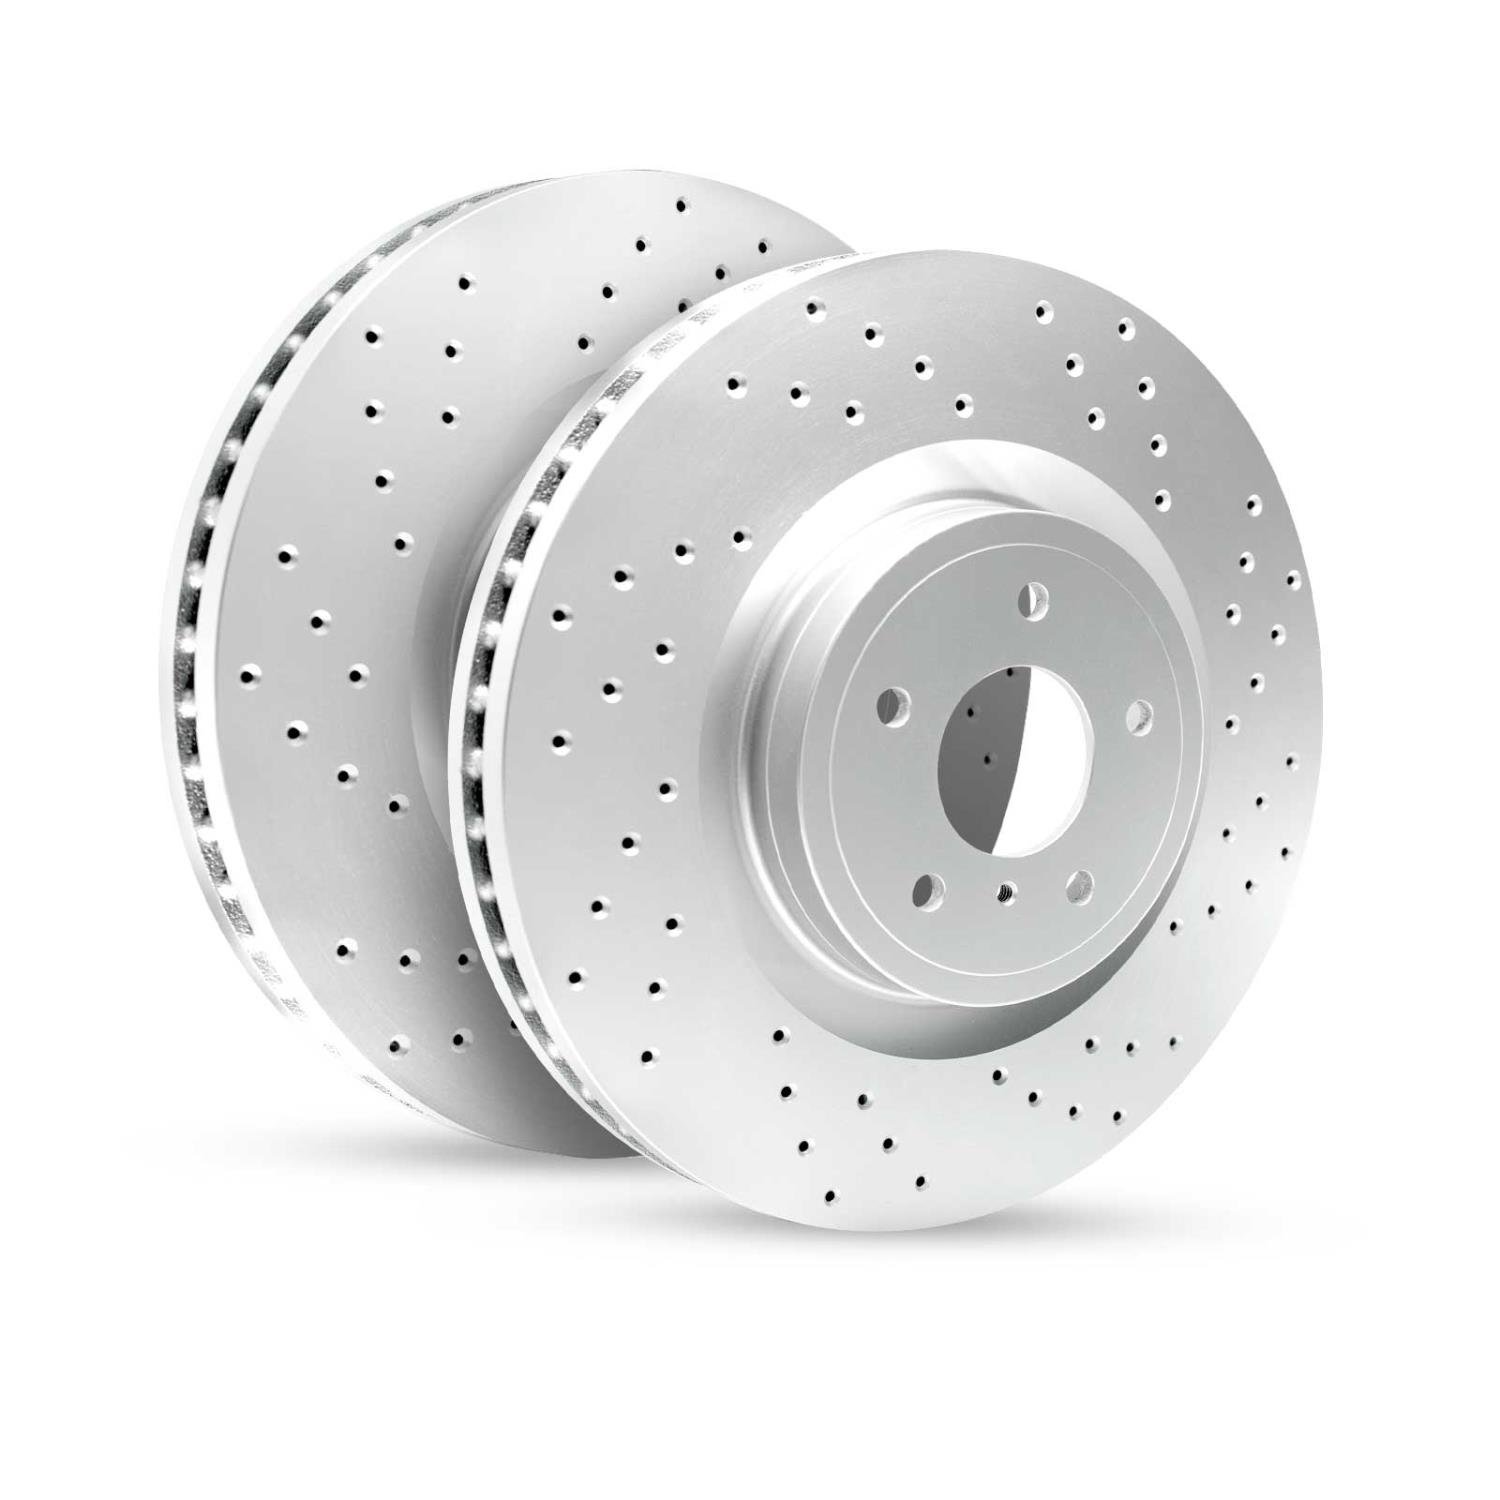 GEO-Carbon Drilled/Slotted Rotors, 2002-2005 BMW, Position: Rear